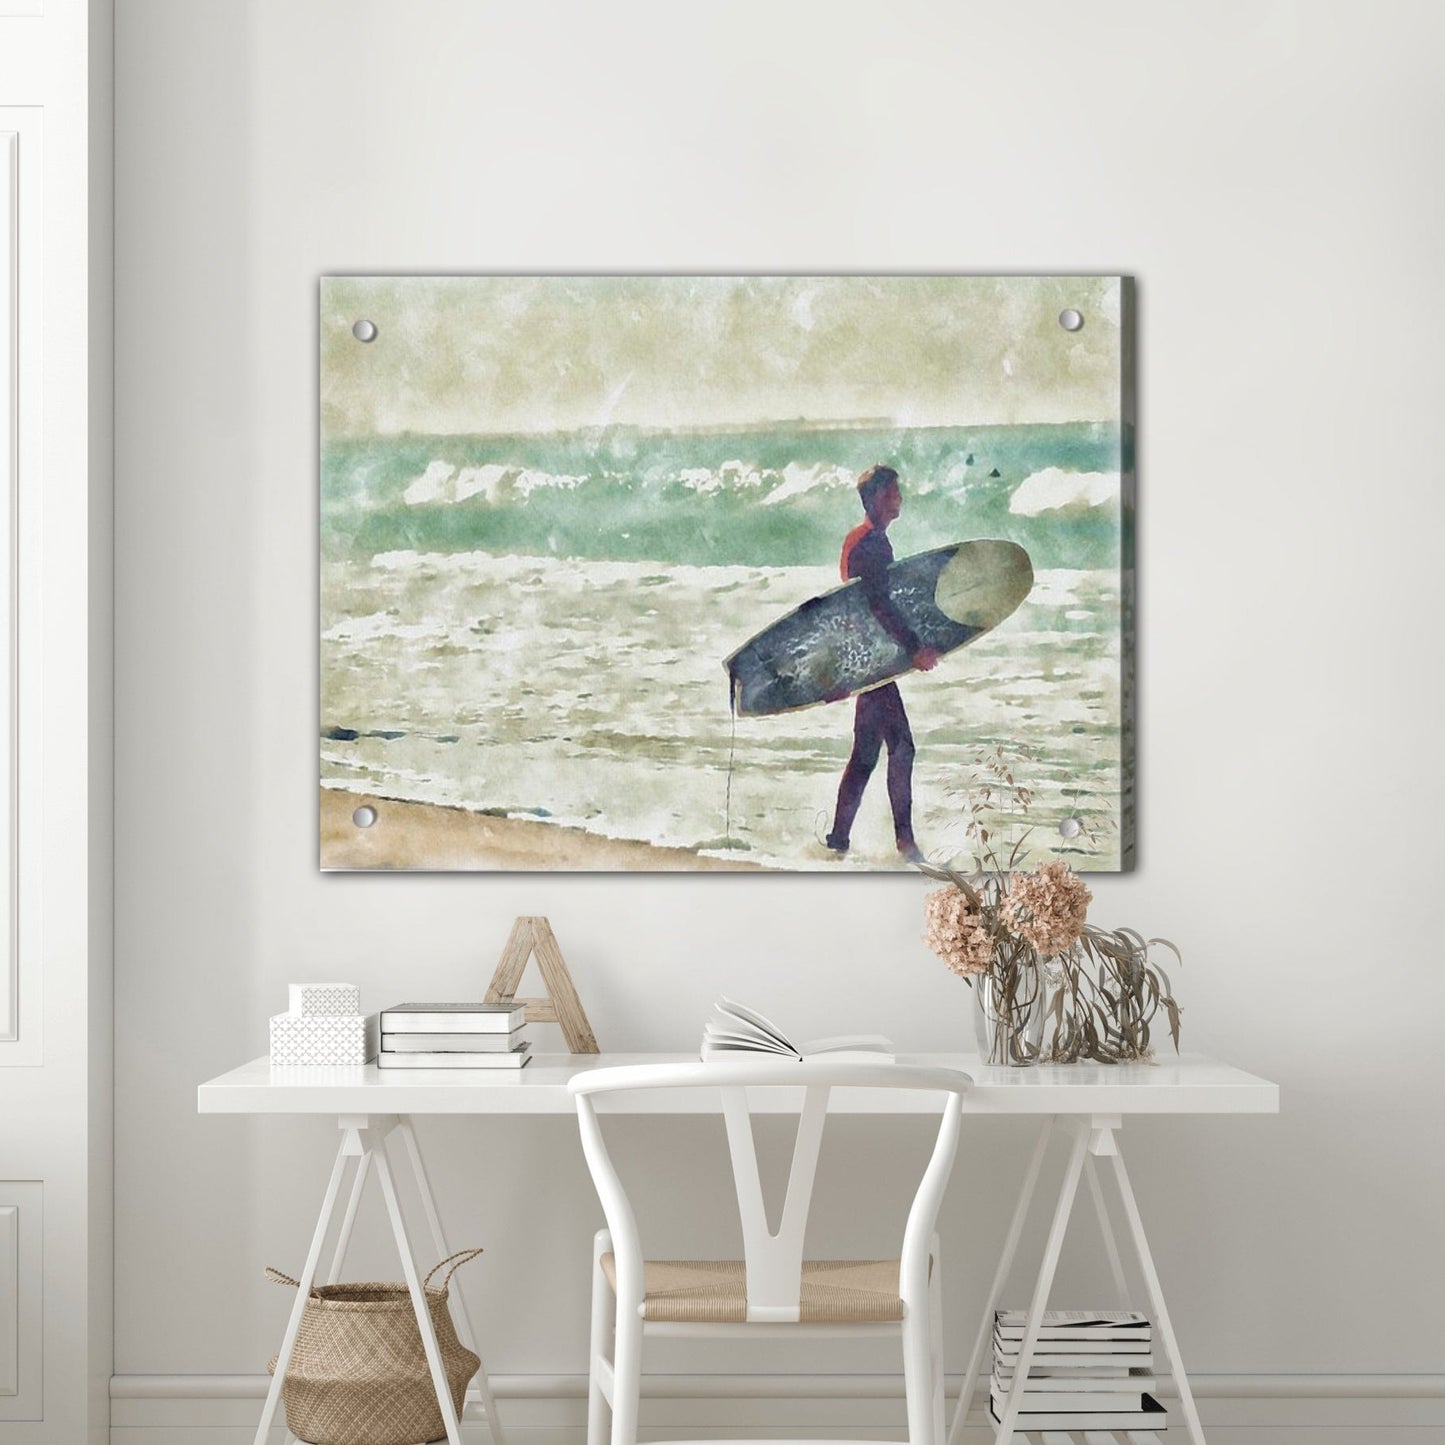 heading out to surf mission beach ca acrylic office decor by jacqueline mb designs 